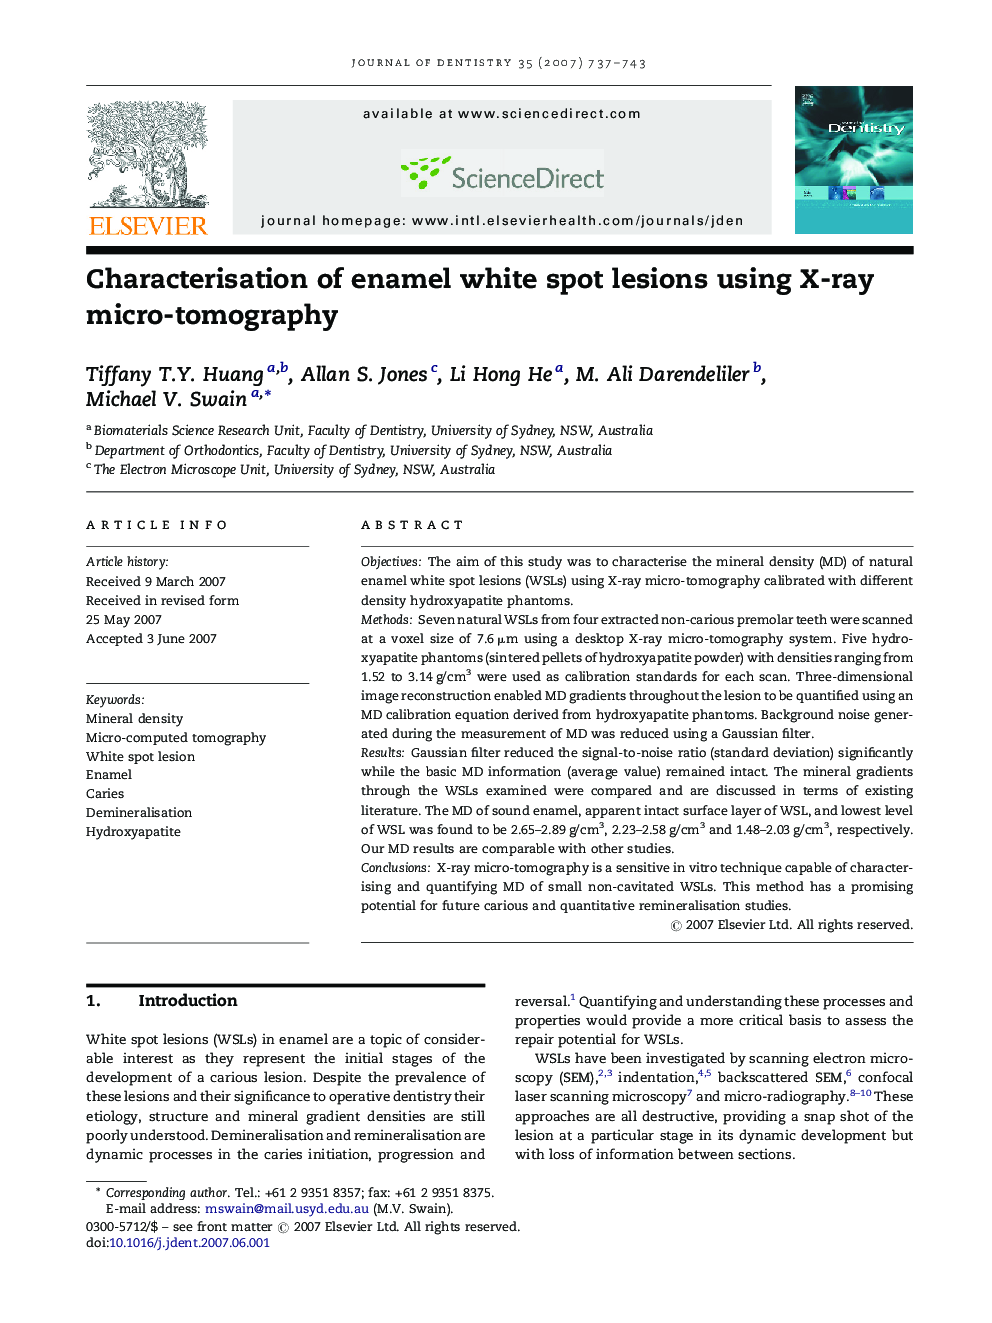 Characterisation of enamel white spot lesions using X-ray micro-tomography